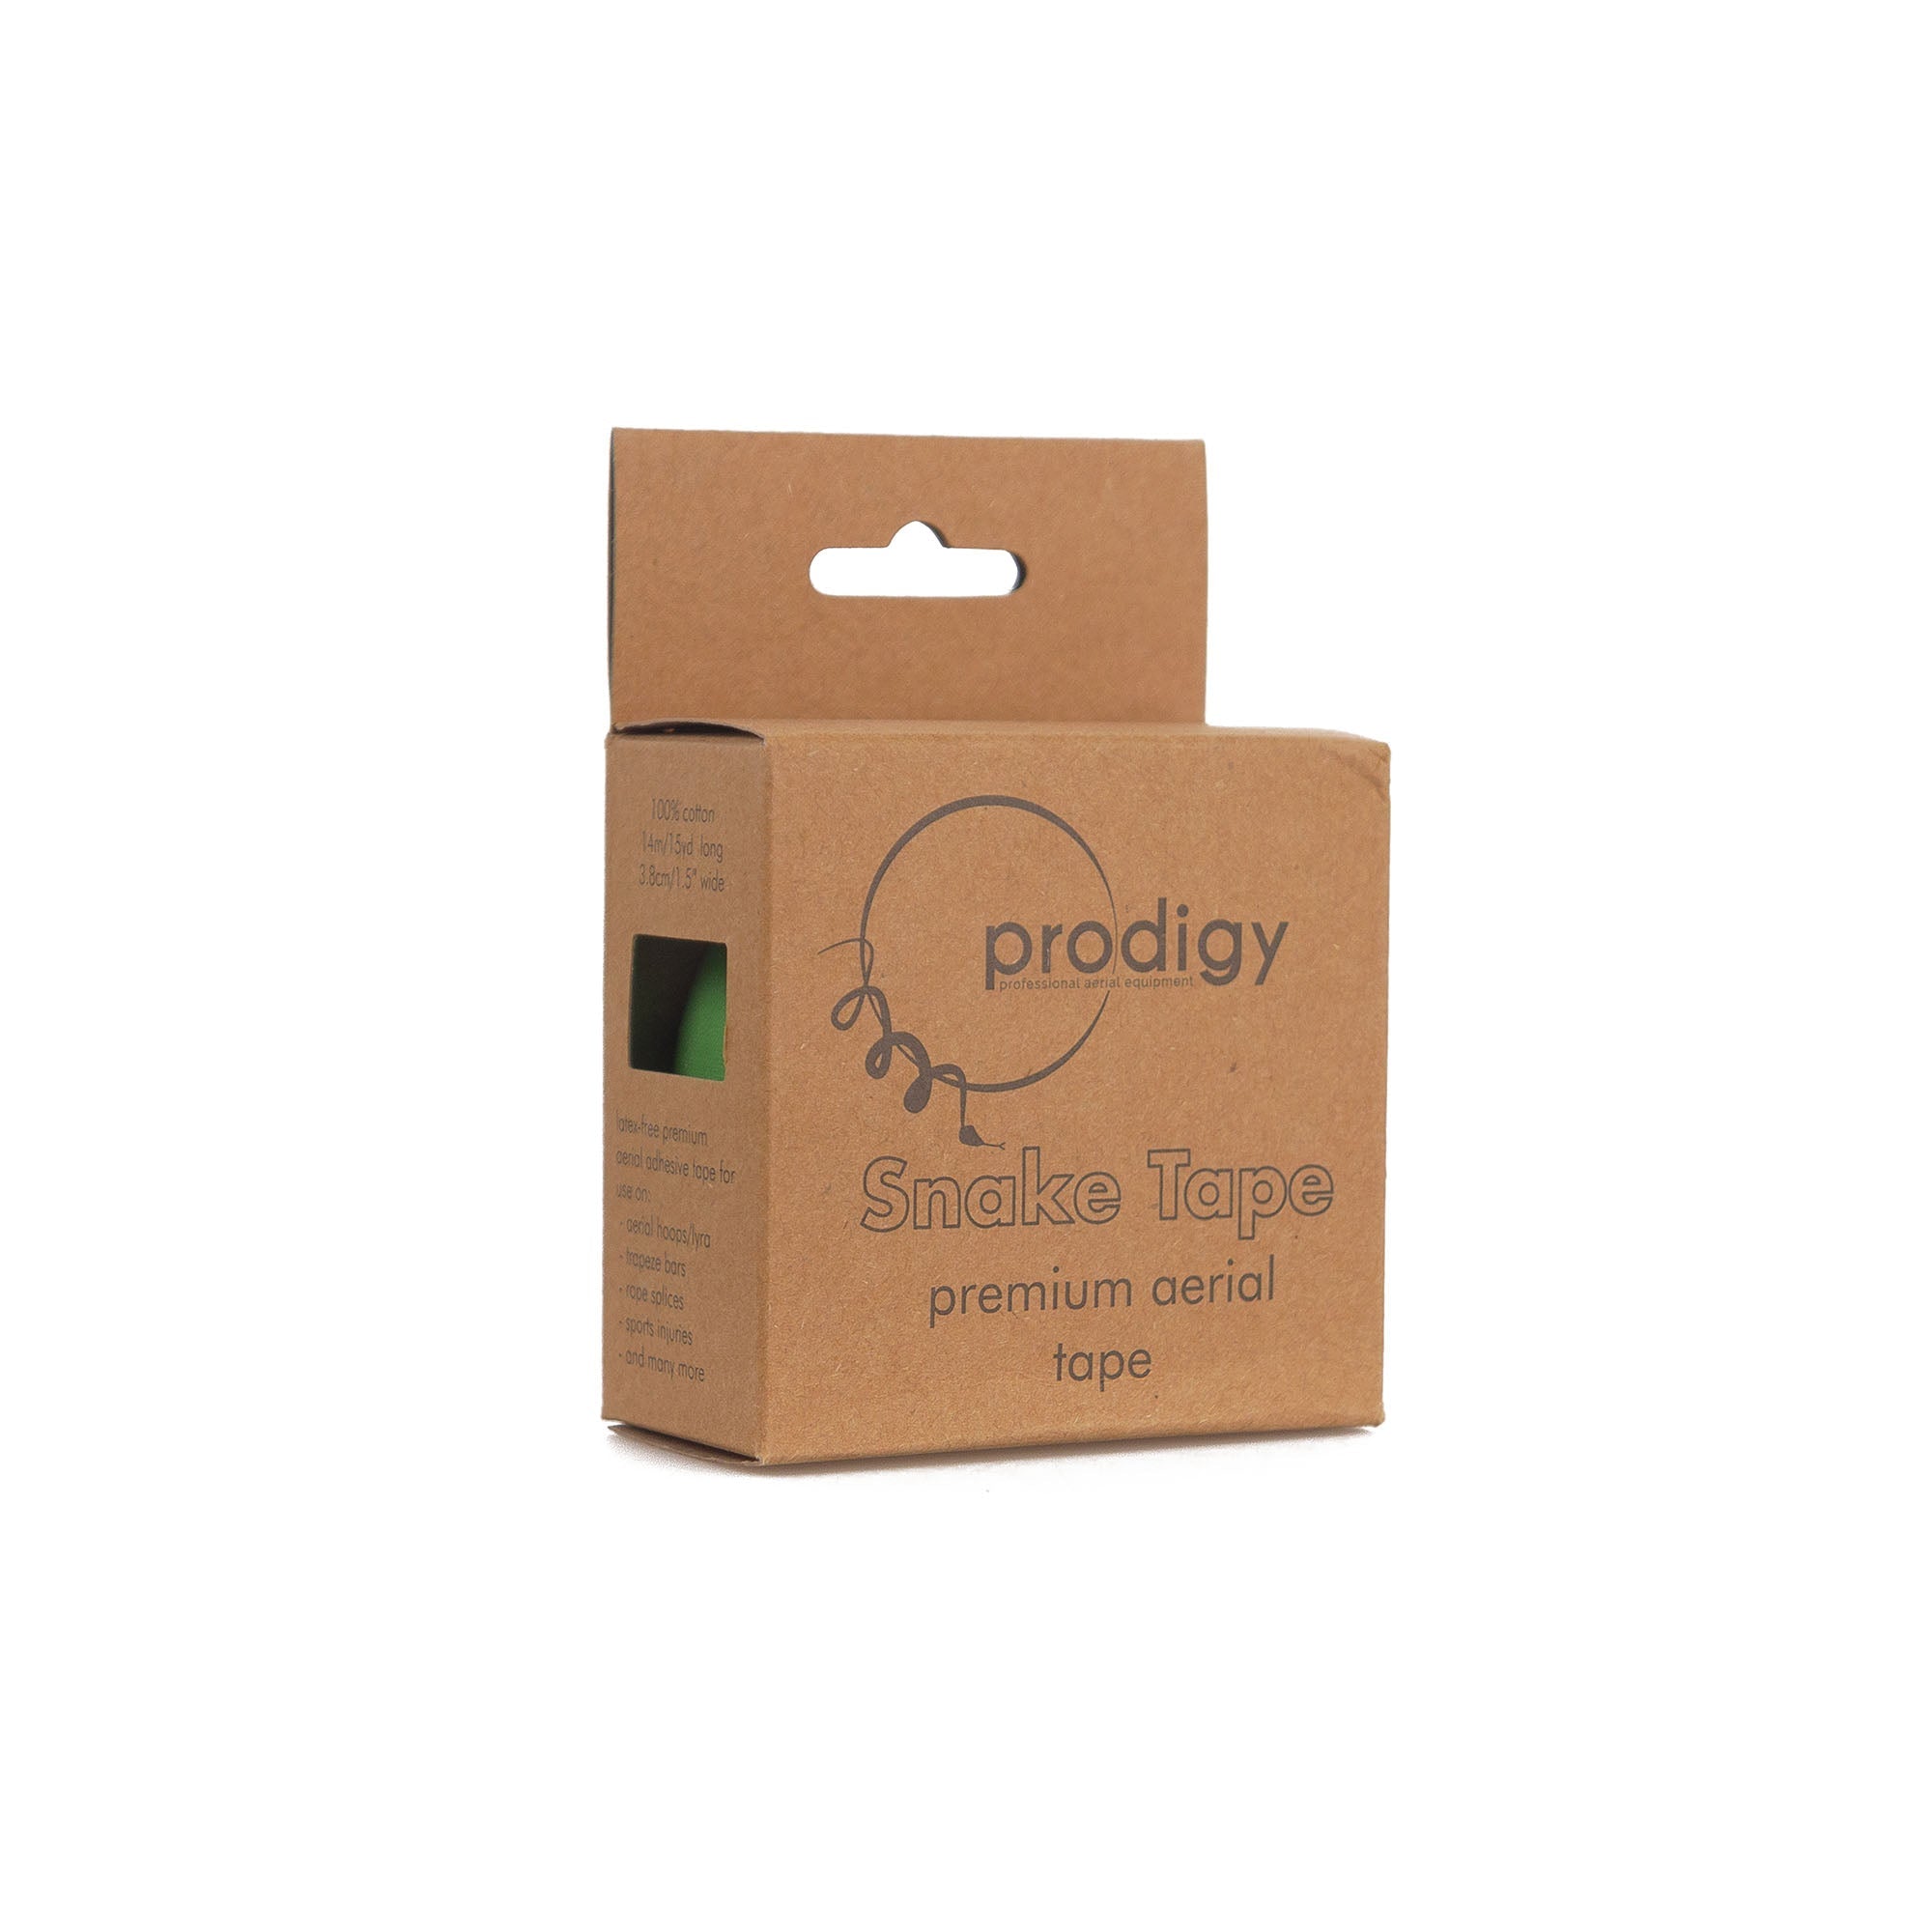 Prodigy snake tape green in box